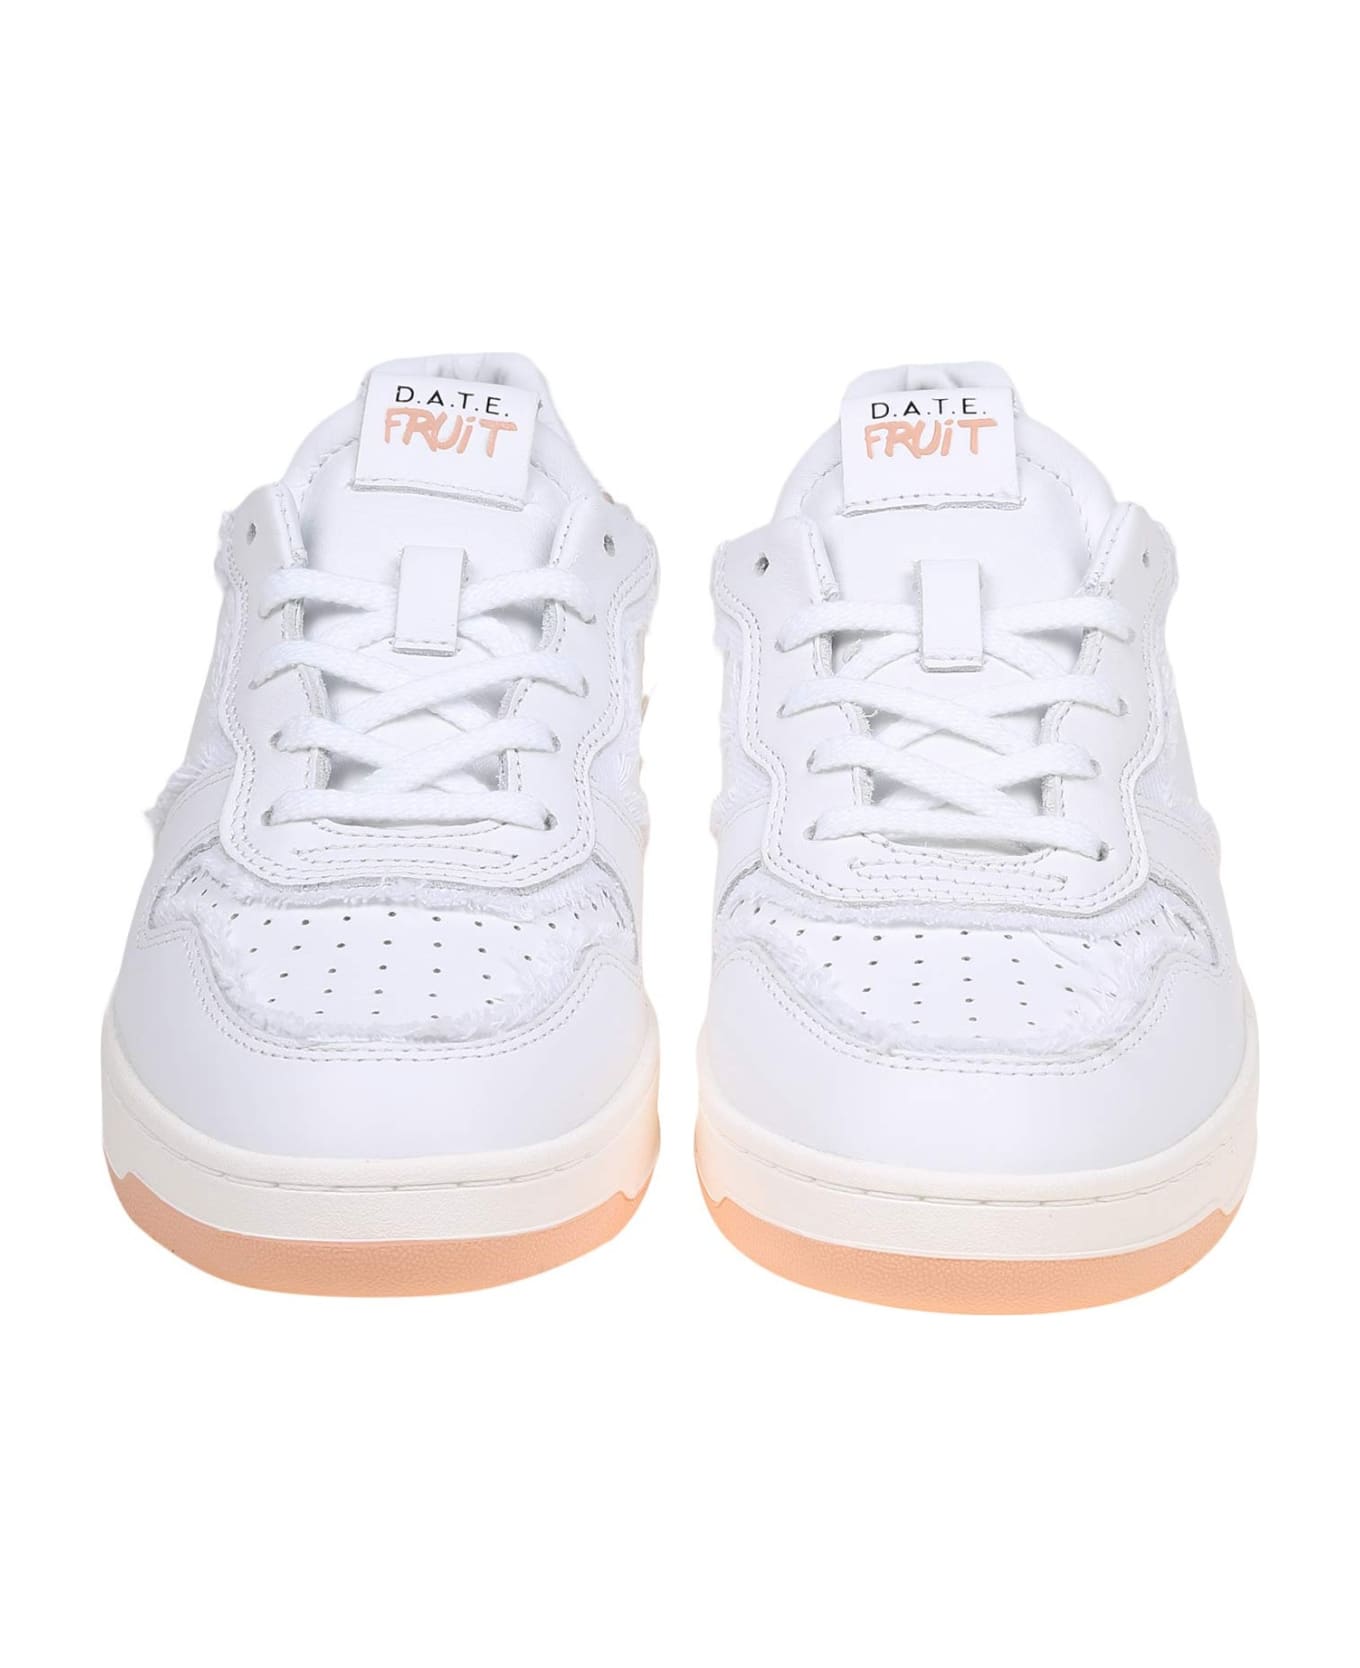 D.A.T.E. Court Sneakers In White Leather - Peach スニーカー